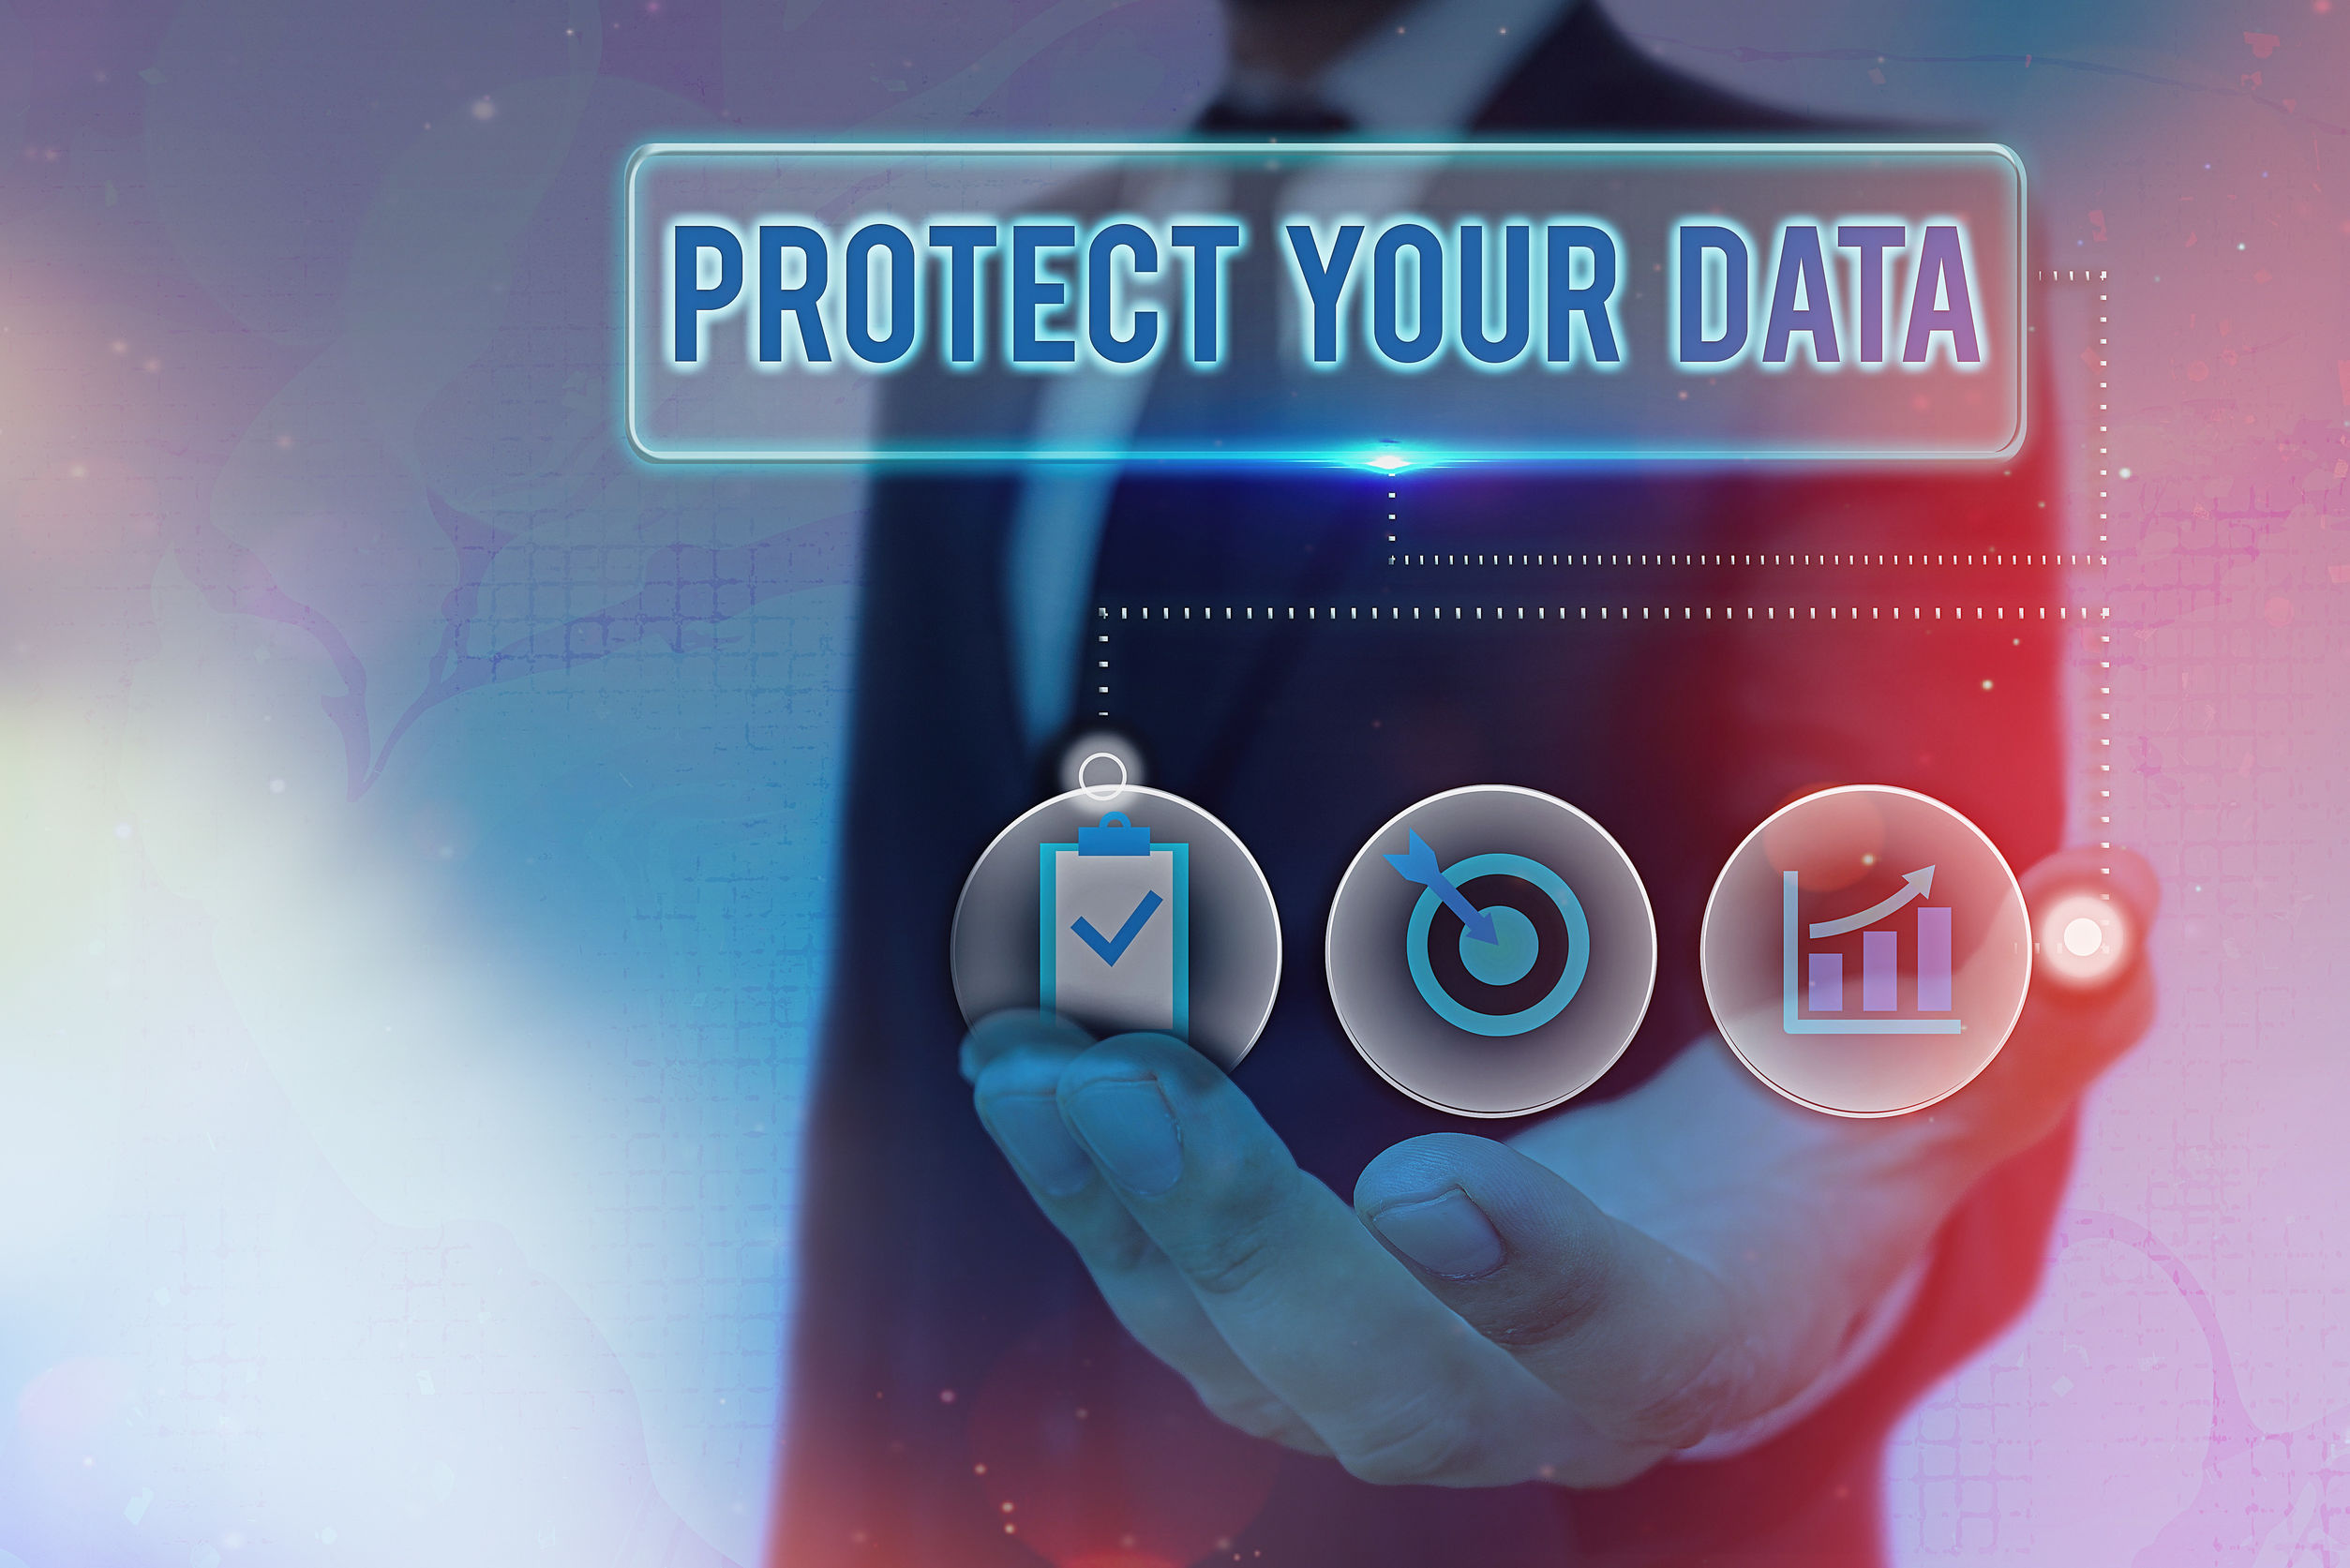 Ransomware – Protect your business data